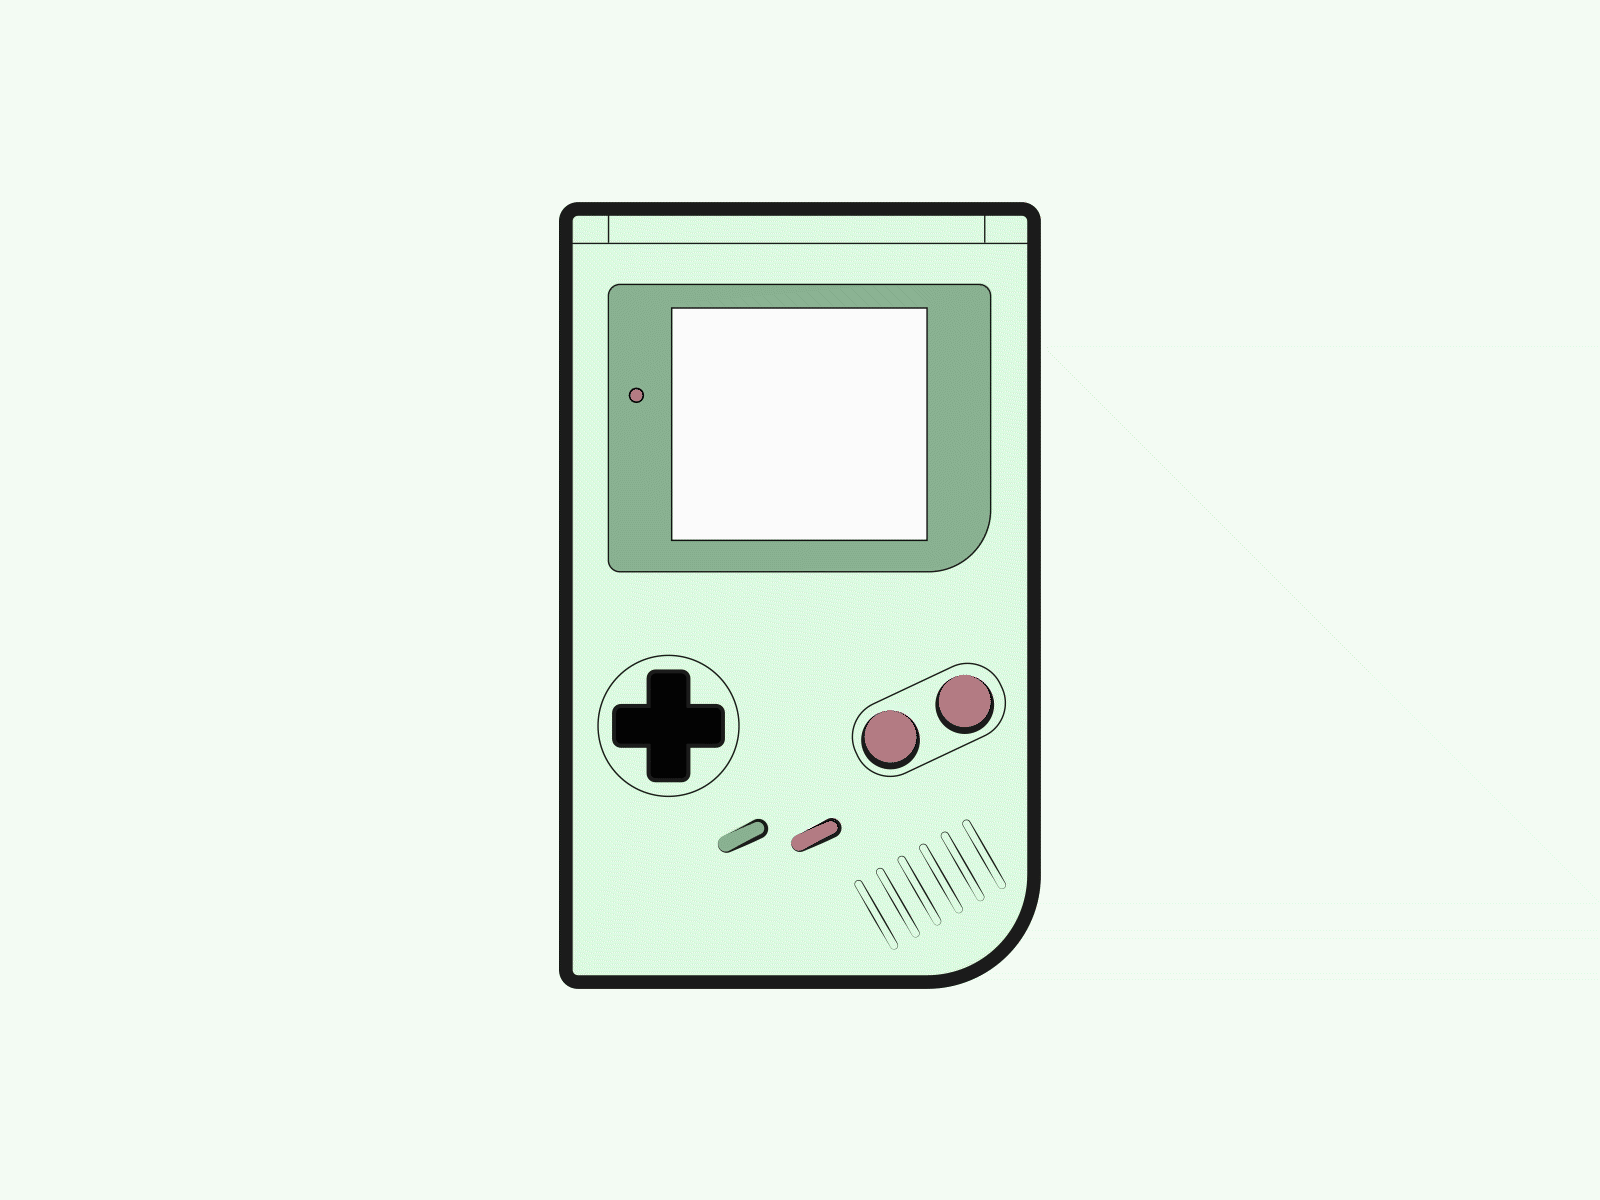 Gameboy Gif by Plessing Markus 🏔 on Dribbble